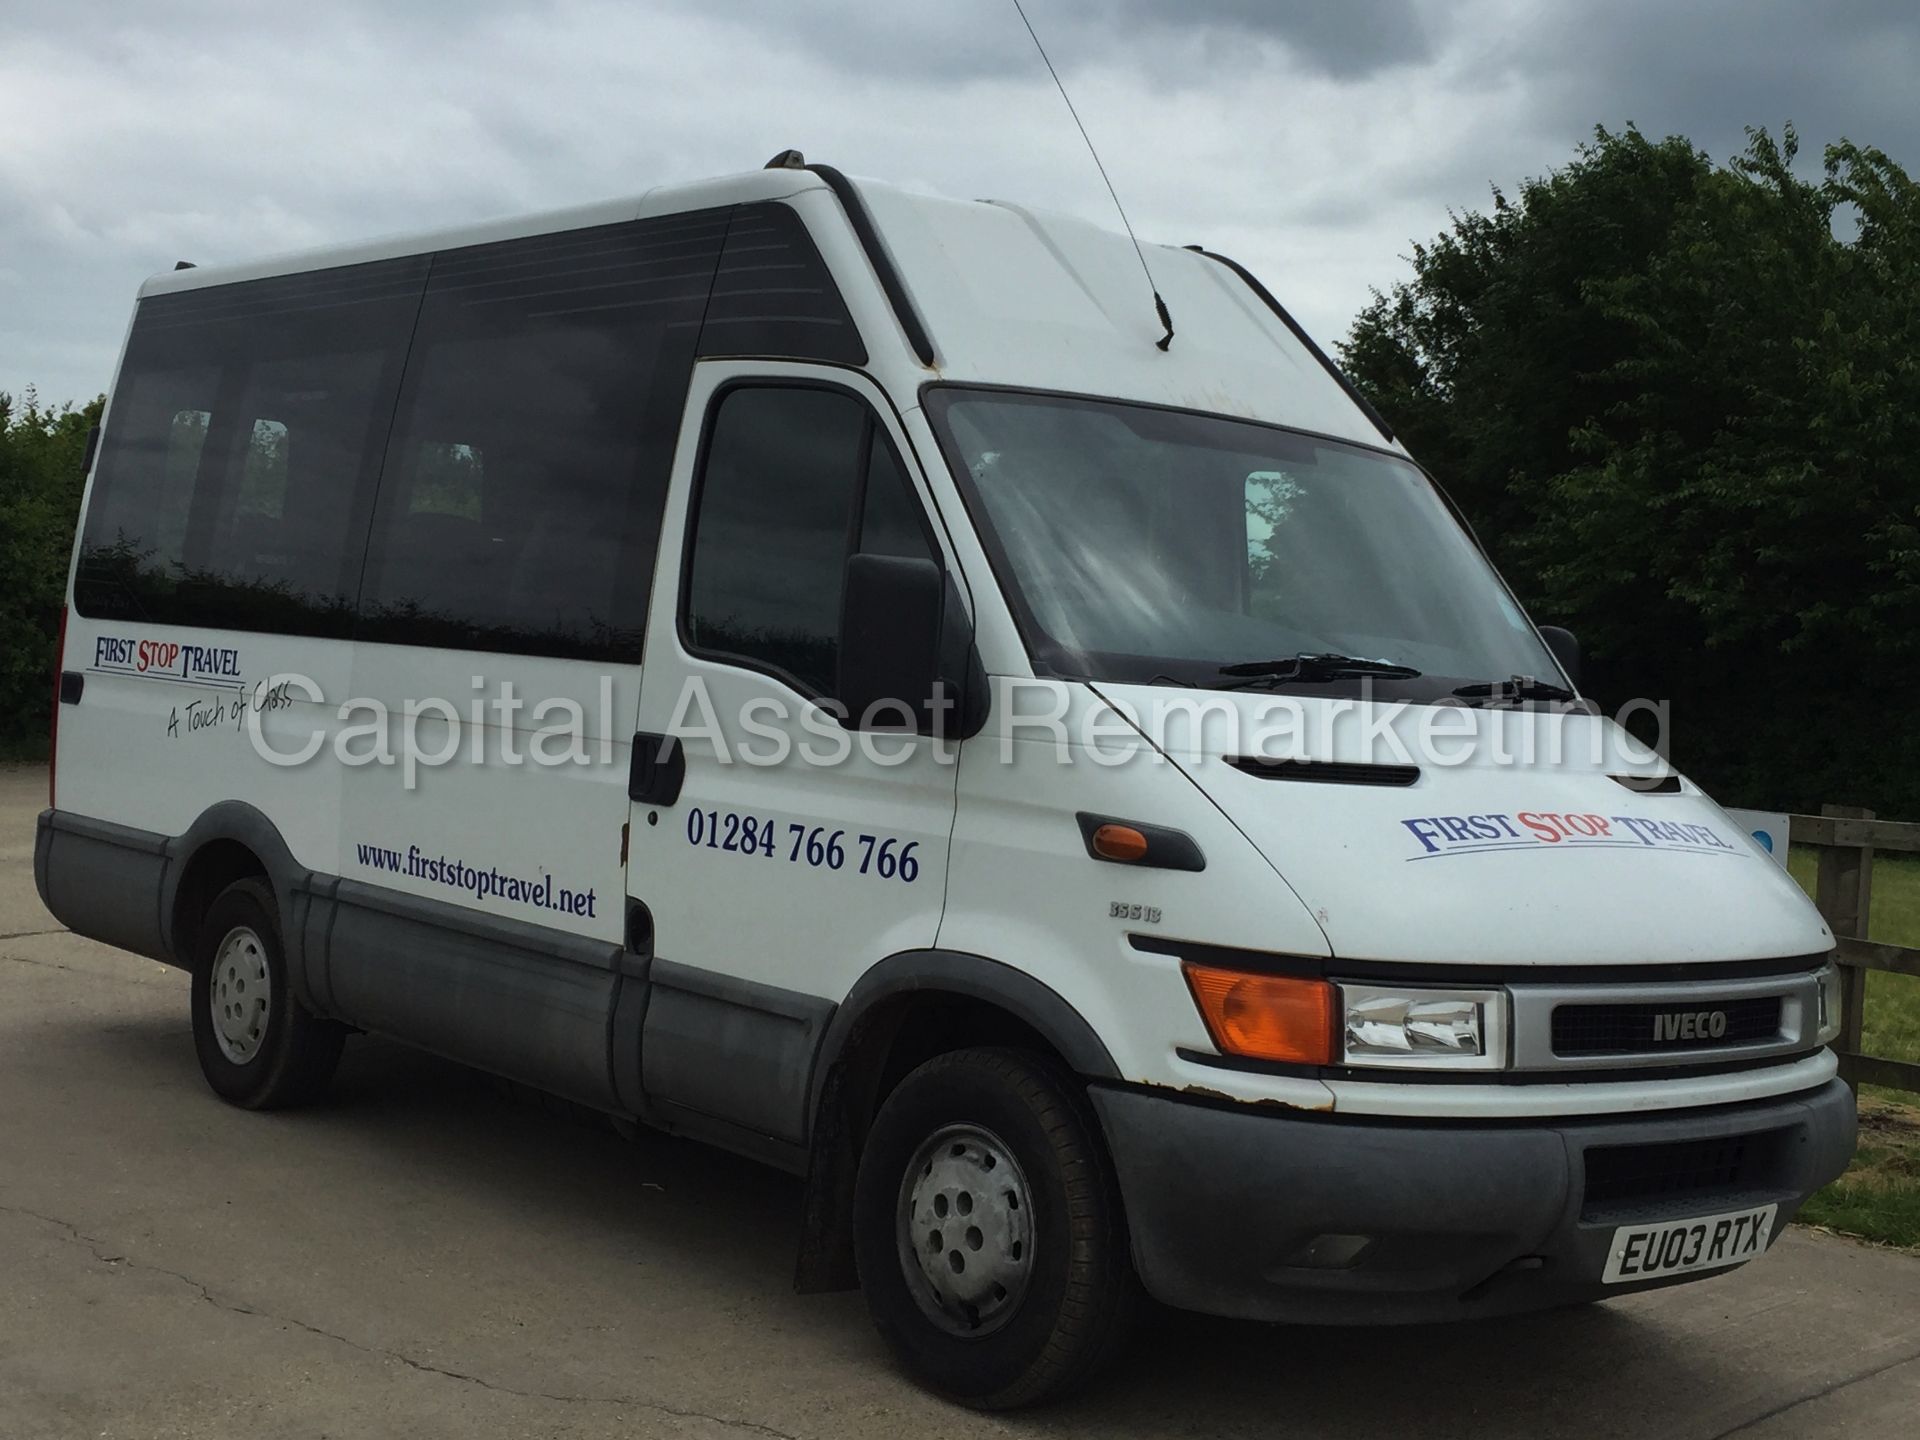 (on sale) IVECO DAILY 35S13 '14 SEATER MINI-BUS' (2003 - 03 REG) '2.3 DIESEL - 6 SPEED' (NO VAT)